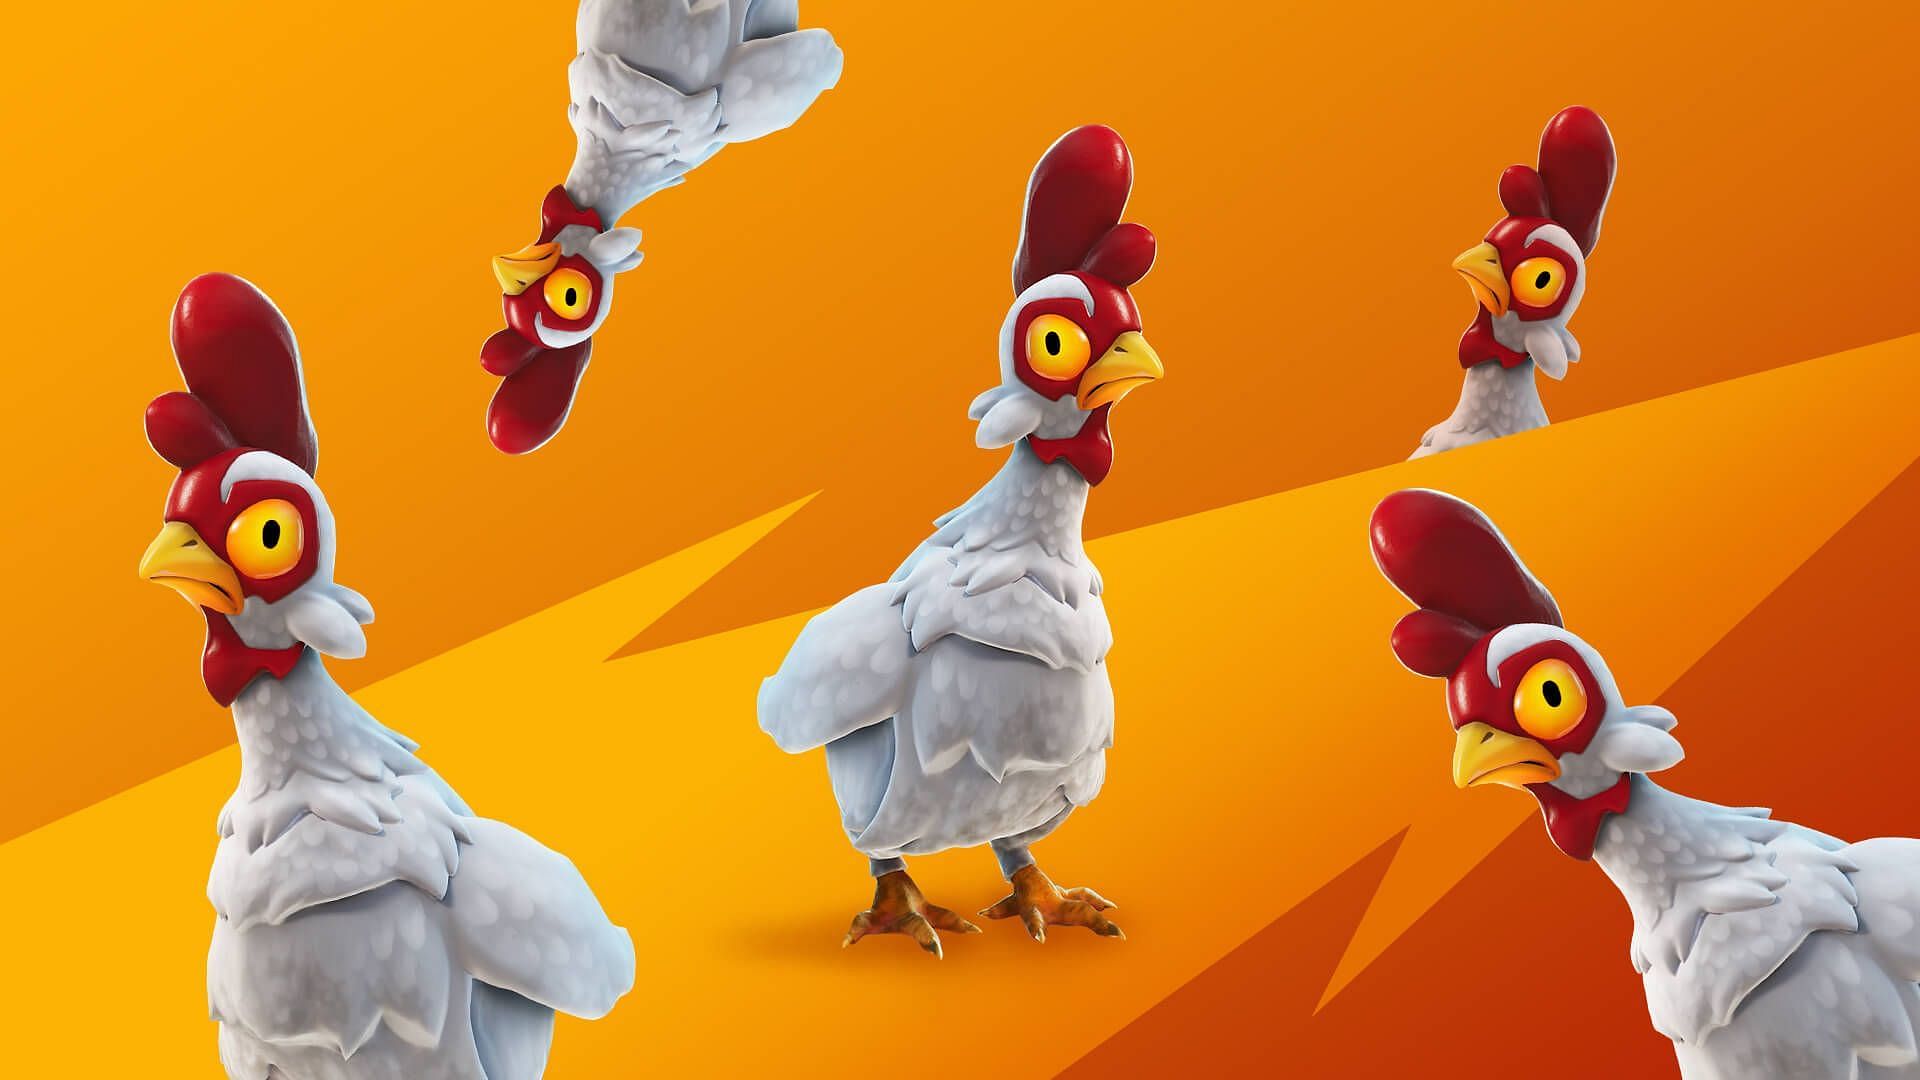 The Chickens in Fortnite (Image via Epic Games)